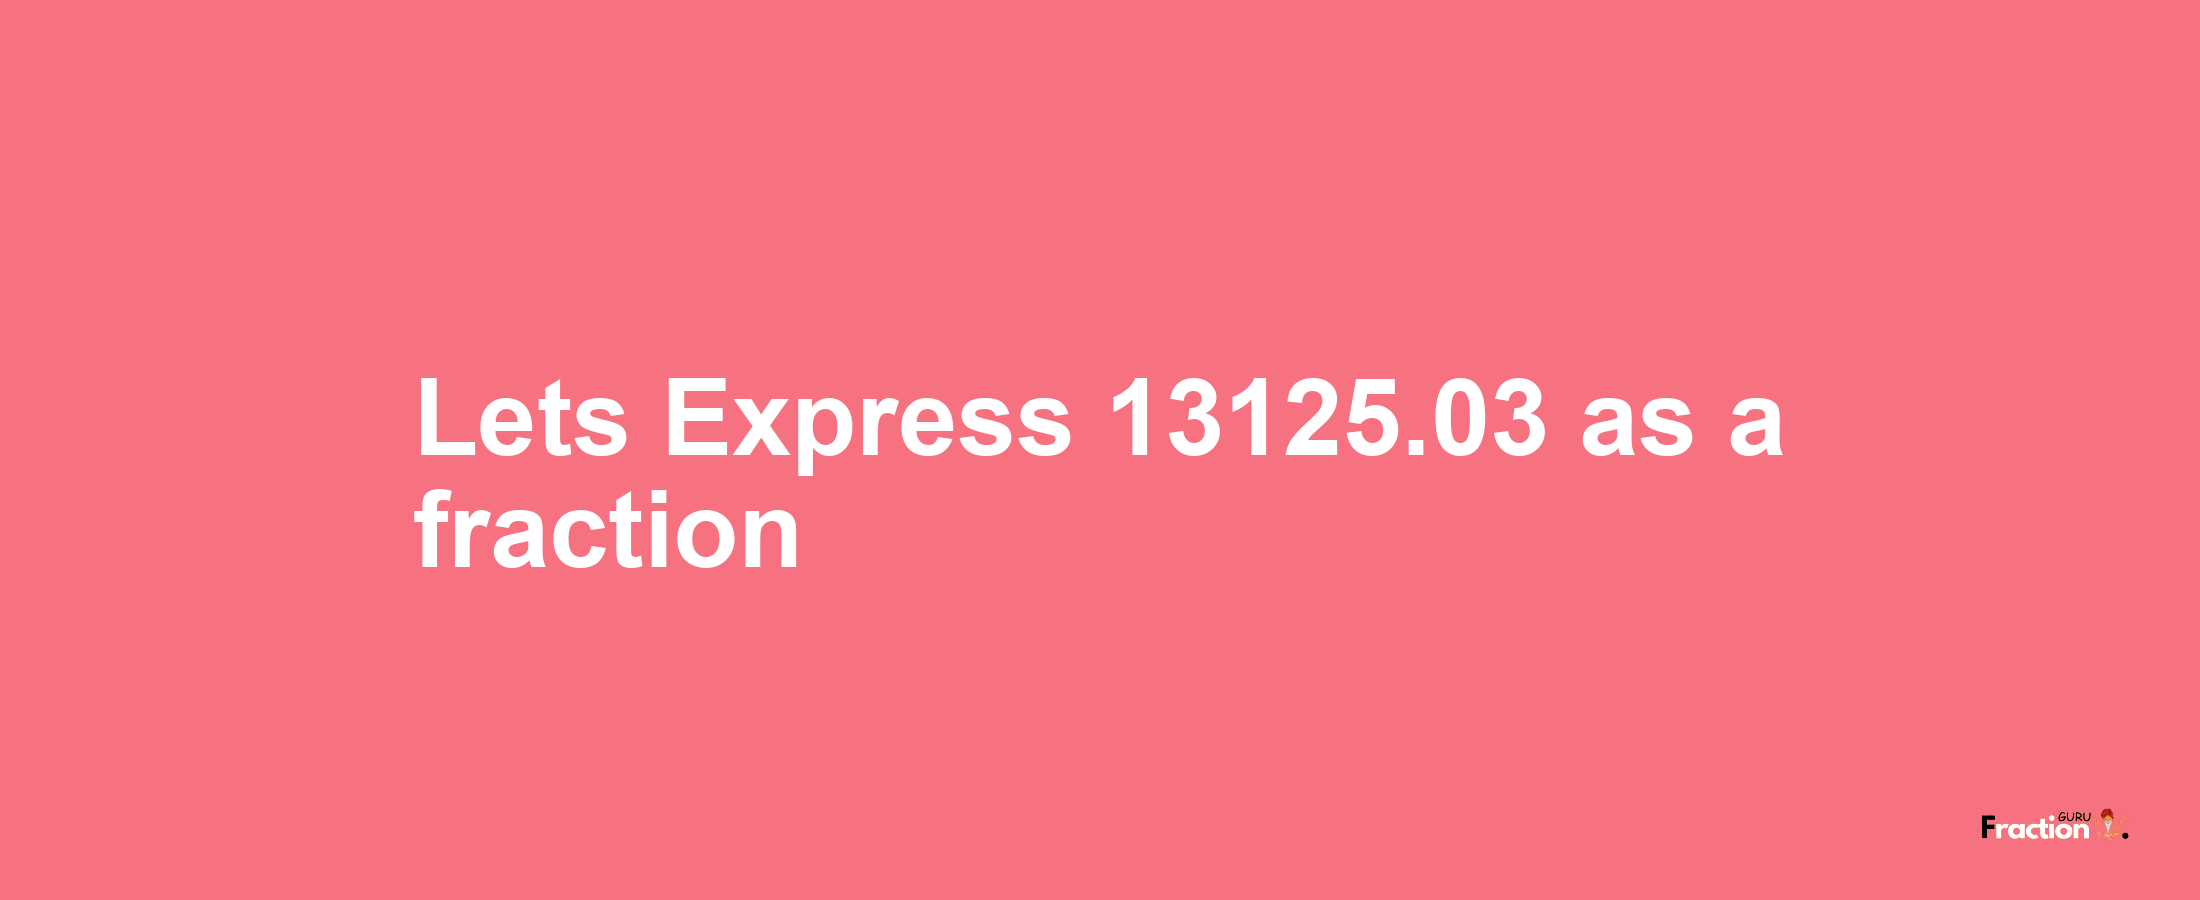 Lets Express 13125.03 as afraction